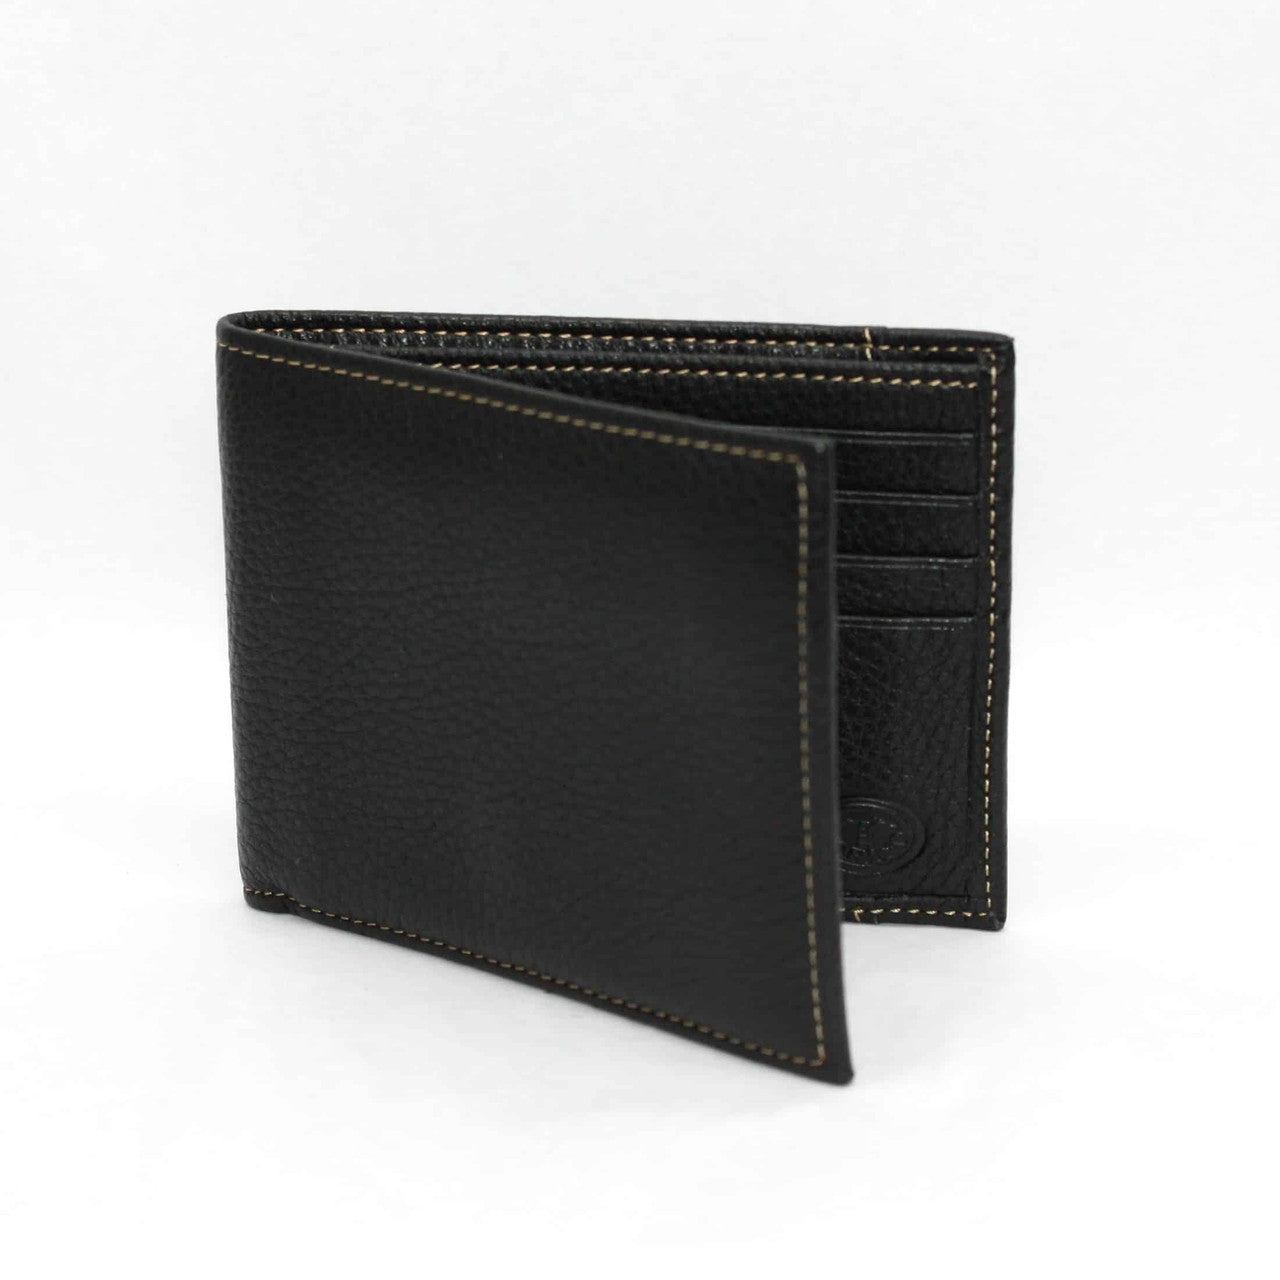 Torino Billfold Wallet Tumbled Glove Leather (2 Colors)